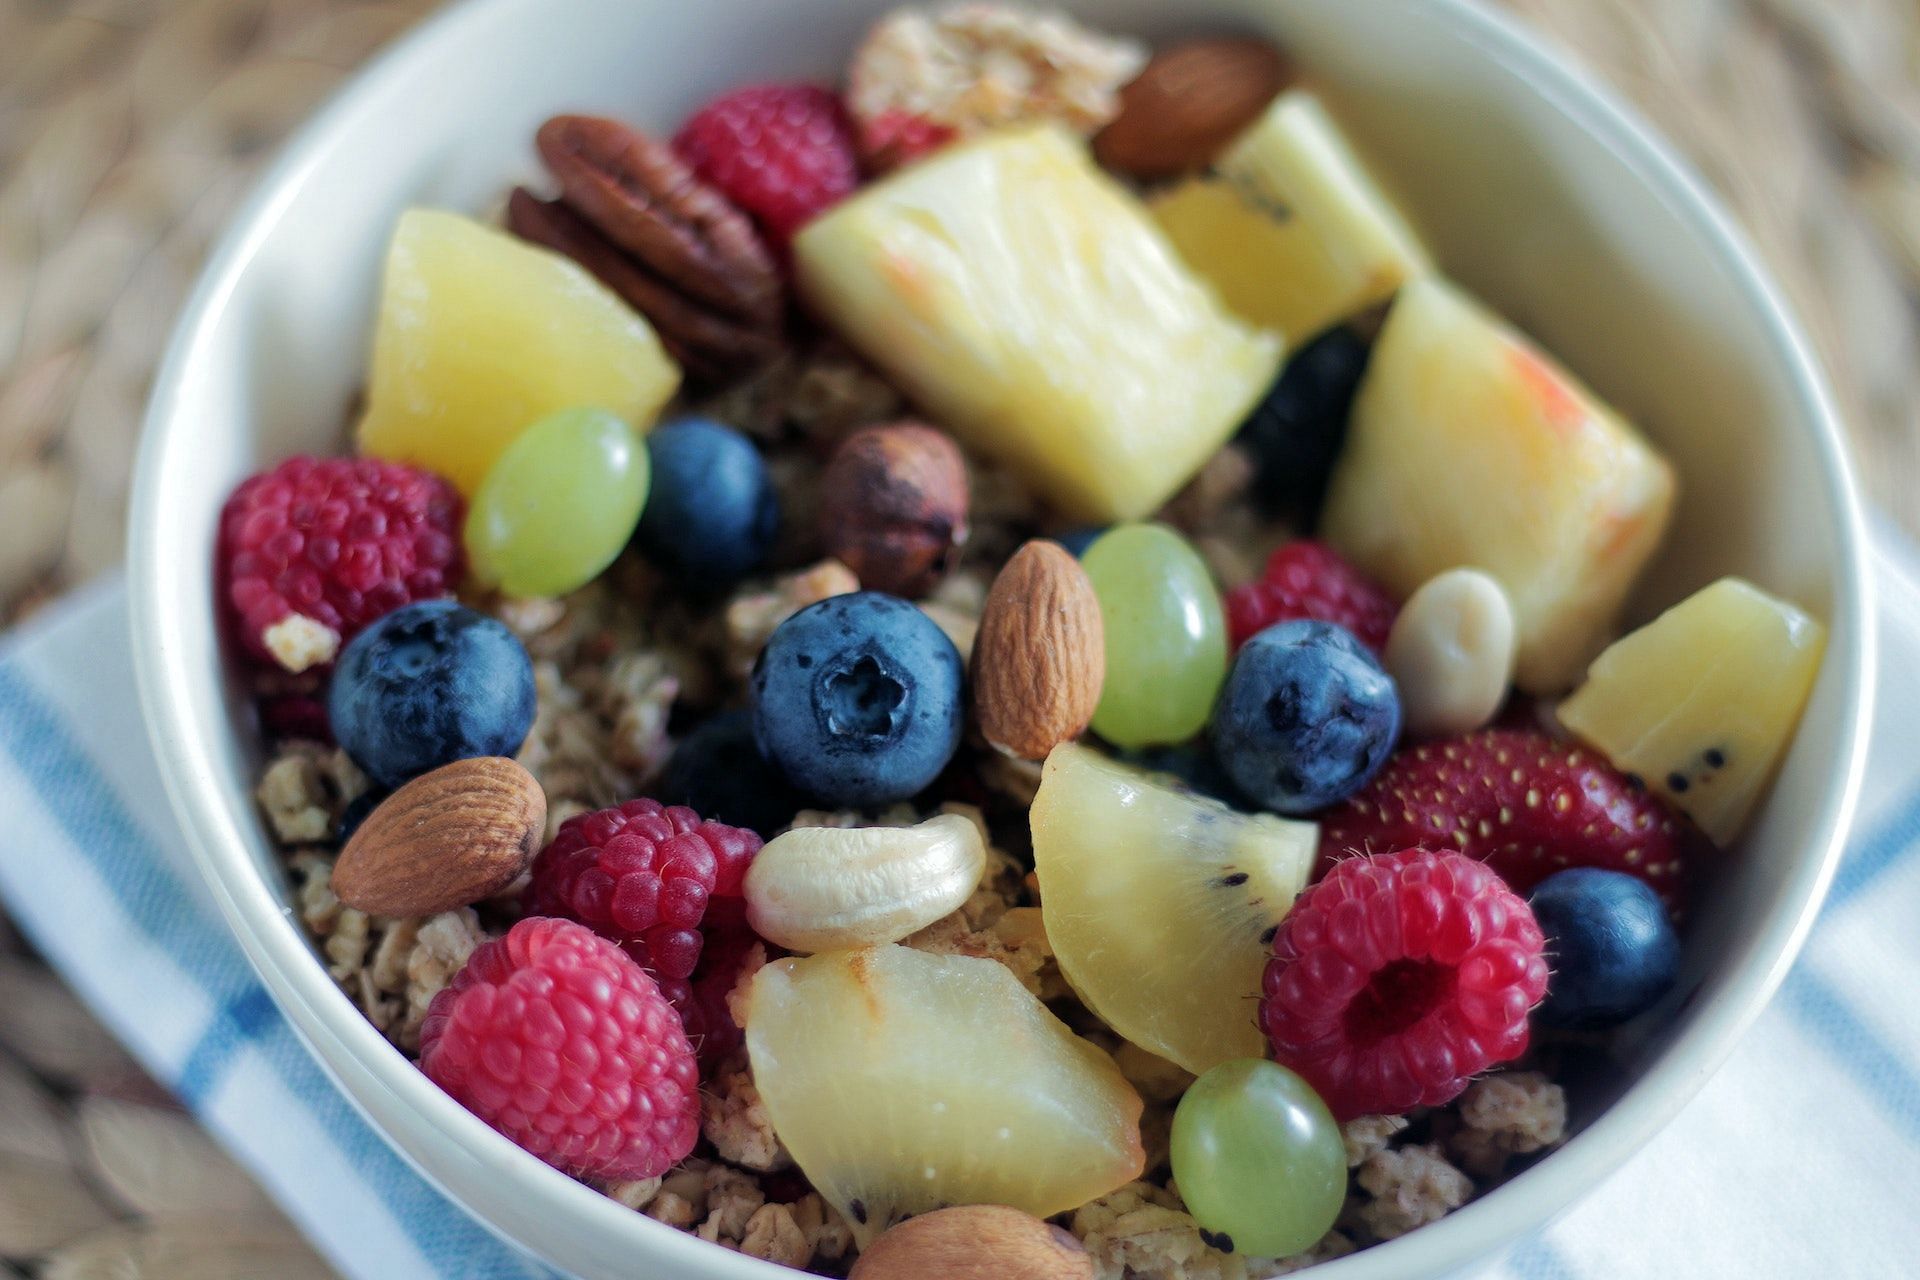 Snacks for diabetes must be rich in fiber and protein. (Photo via Pexels/J&Eacute;SHOOTS)